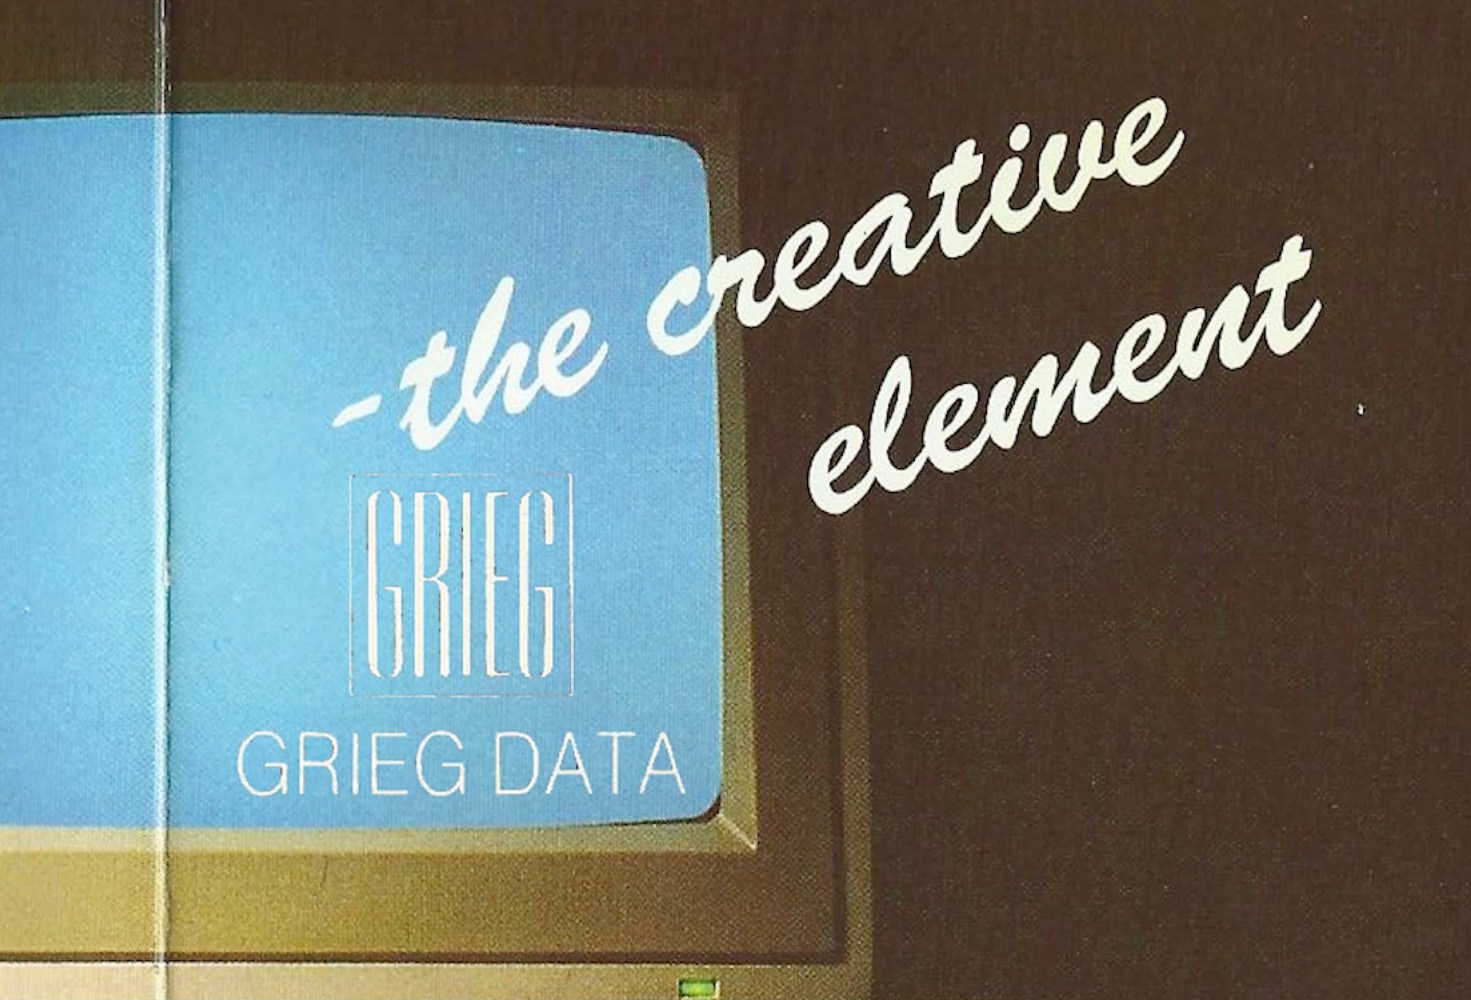 Grieg Group with an old TV-ad, presenting Grieg Data and the creative element.